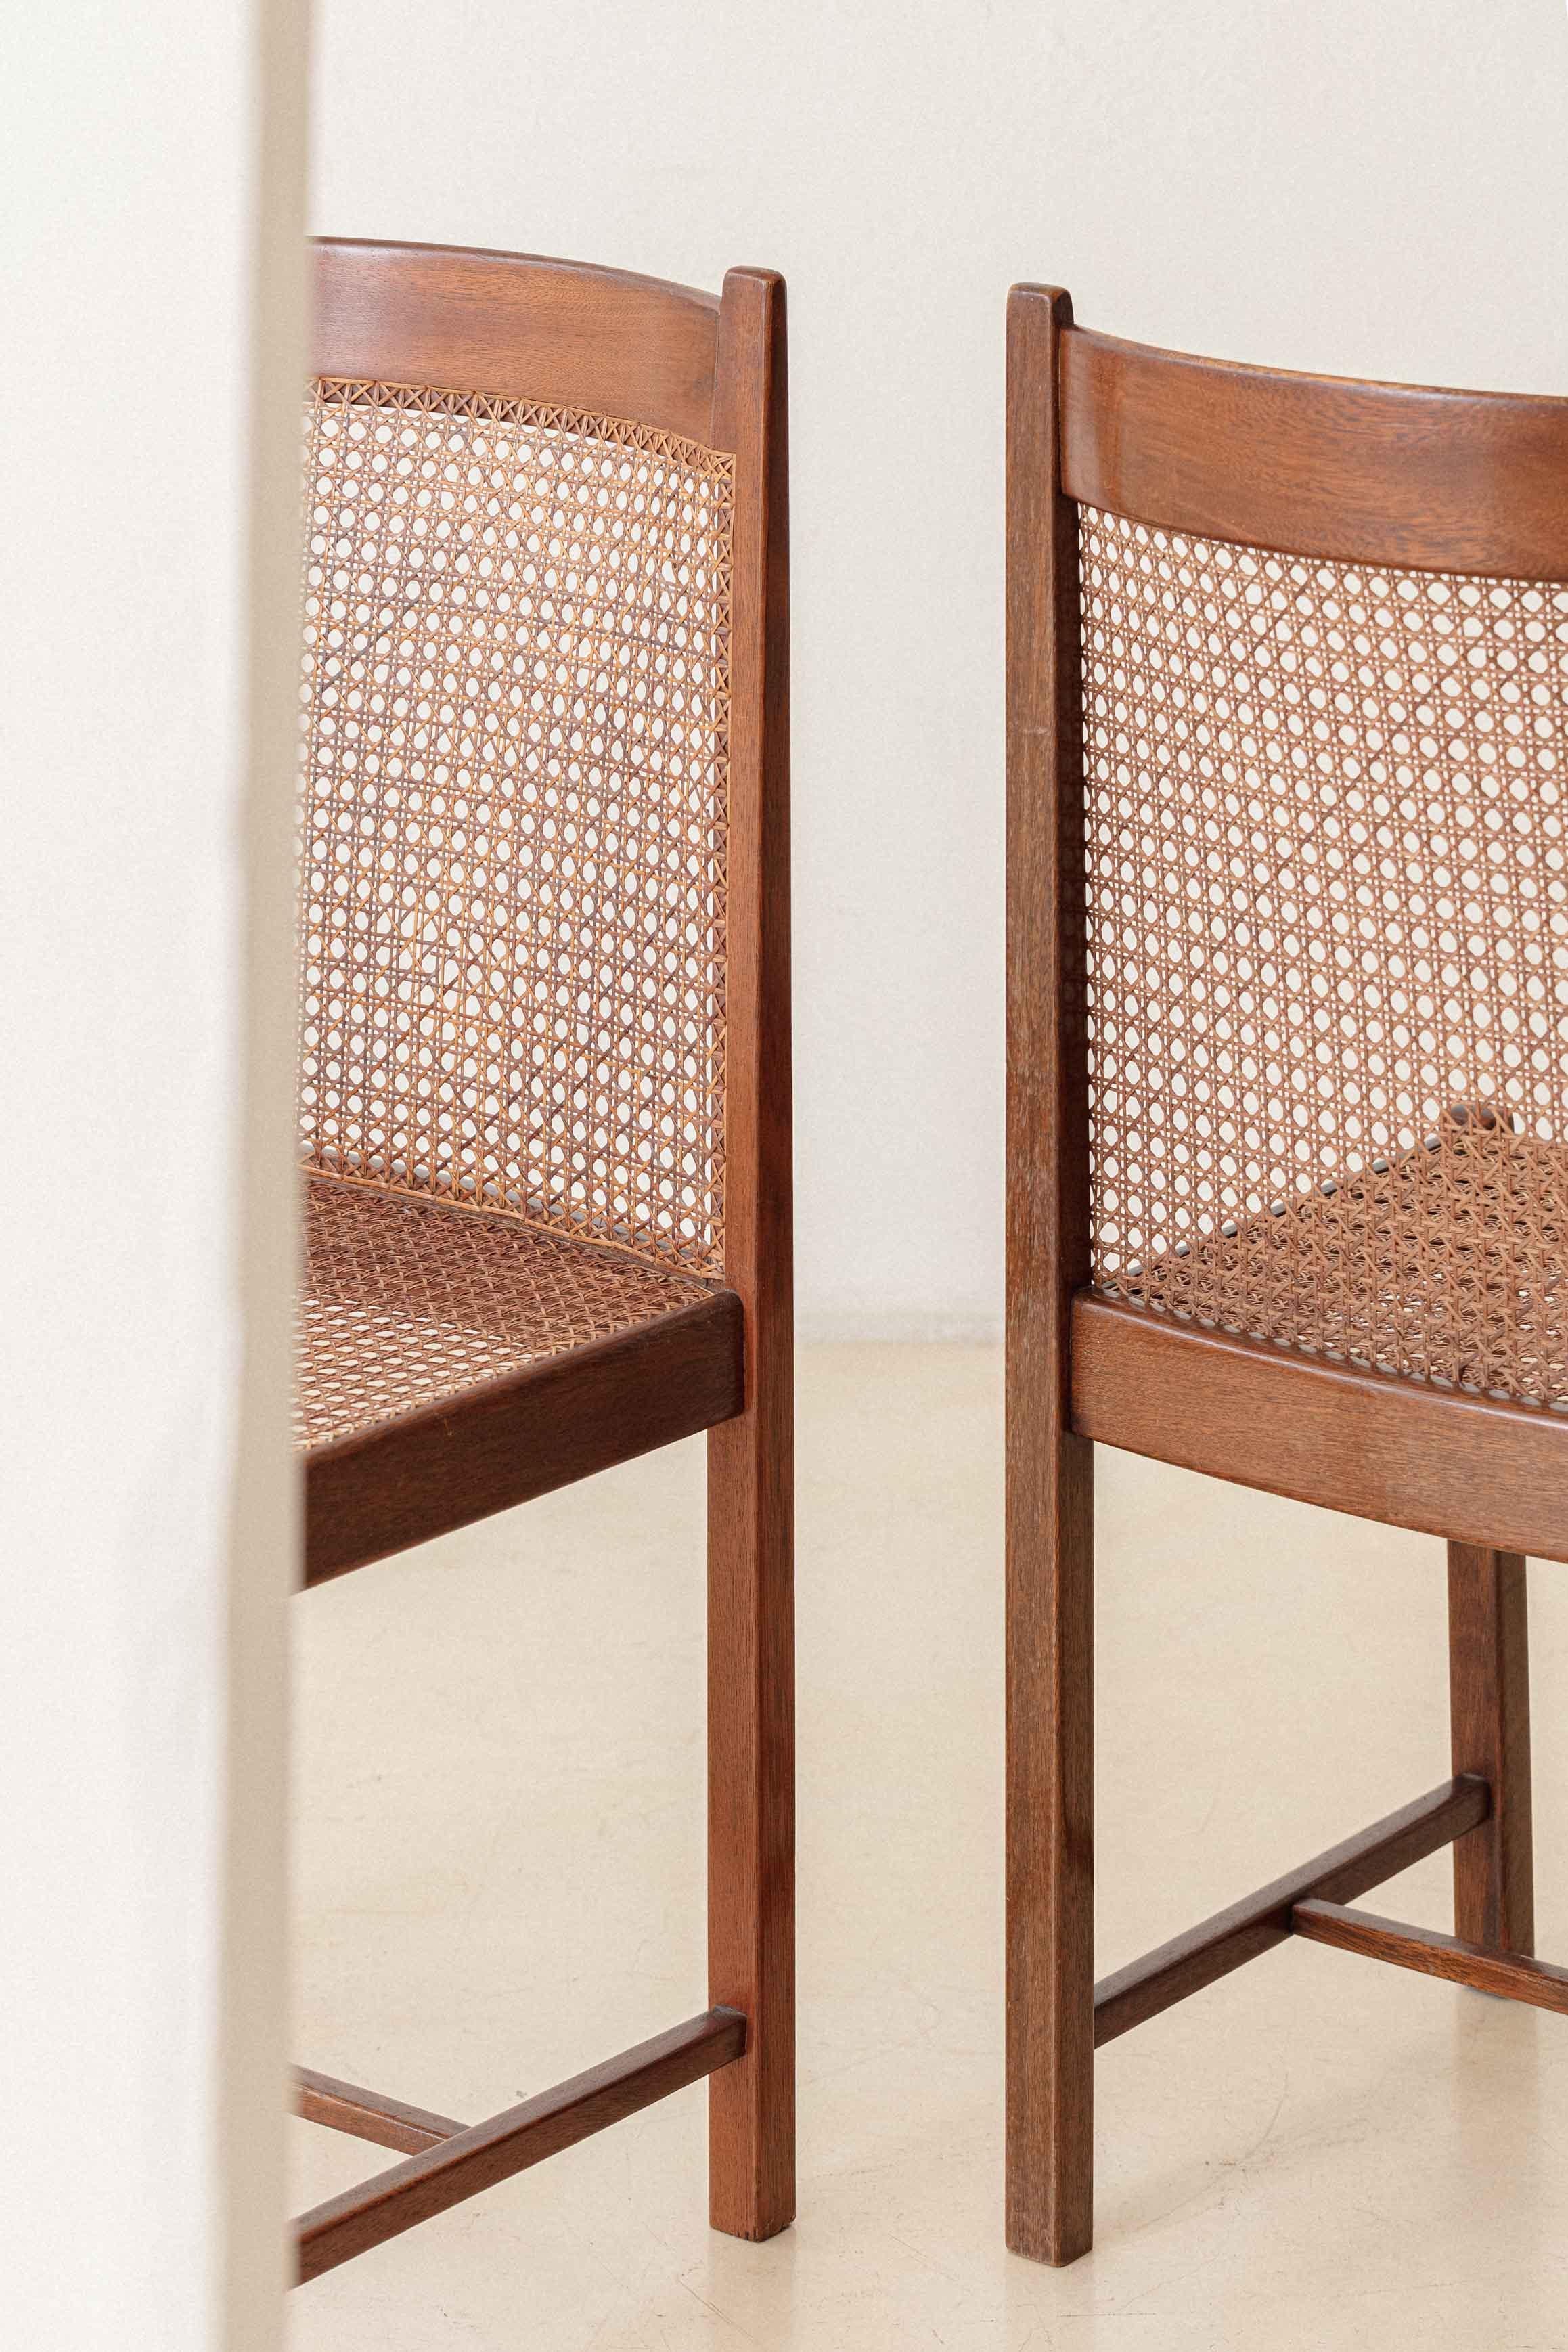 Brazilian Rosewood Dining Chairs by Fatima Arquitetura Interiores 'FAI', 1960s For Sale 7